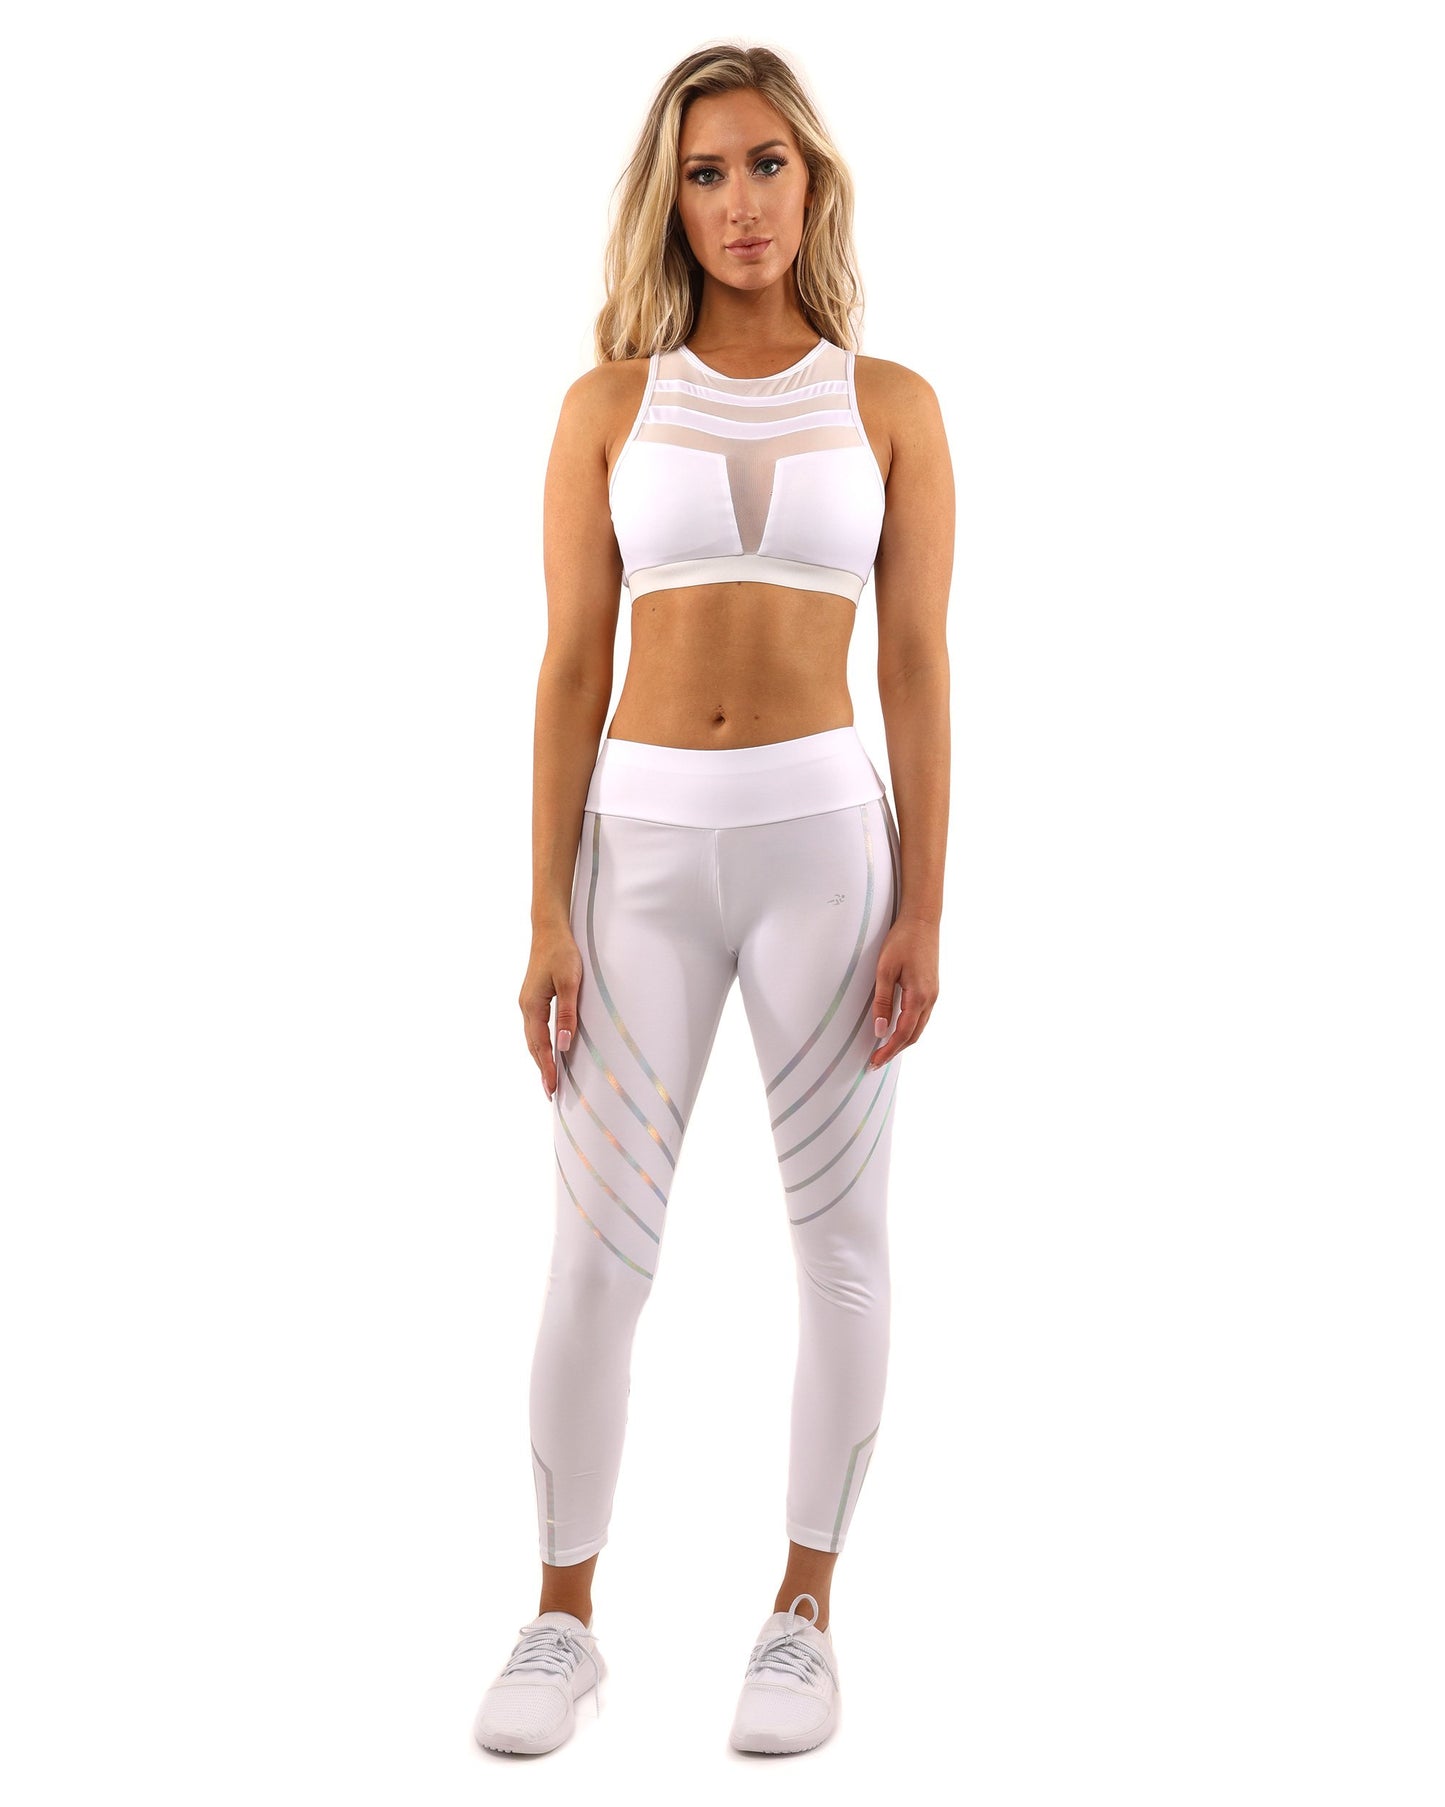 Experience the perfect blend of comfort and style with our Laguna White Leggings. Elevate your active wear wardrobe with our versatile white leggings for women.